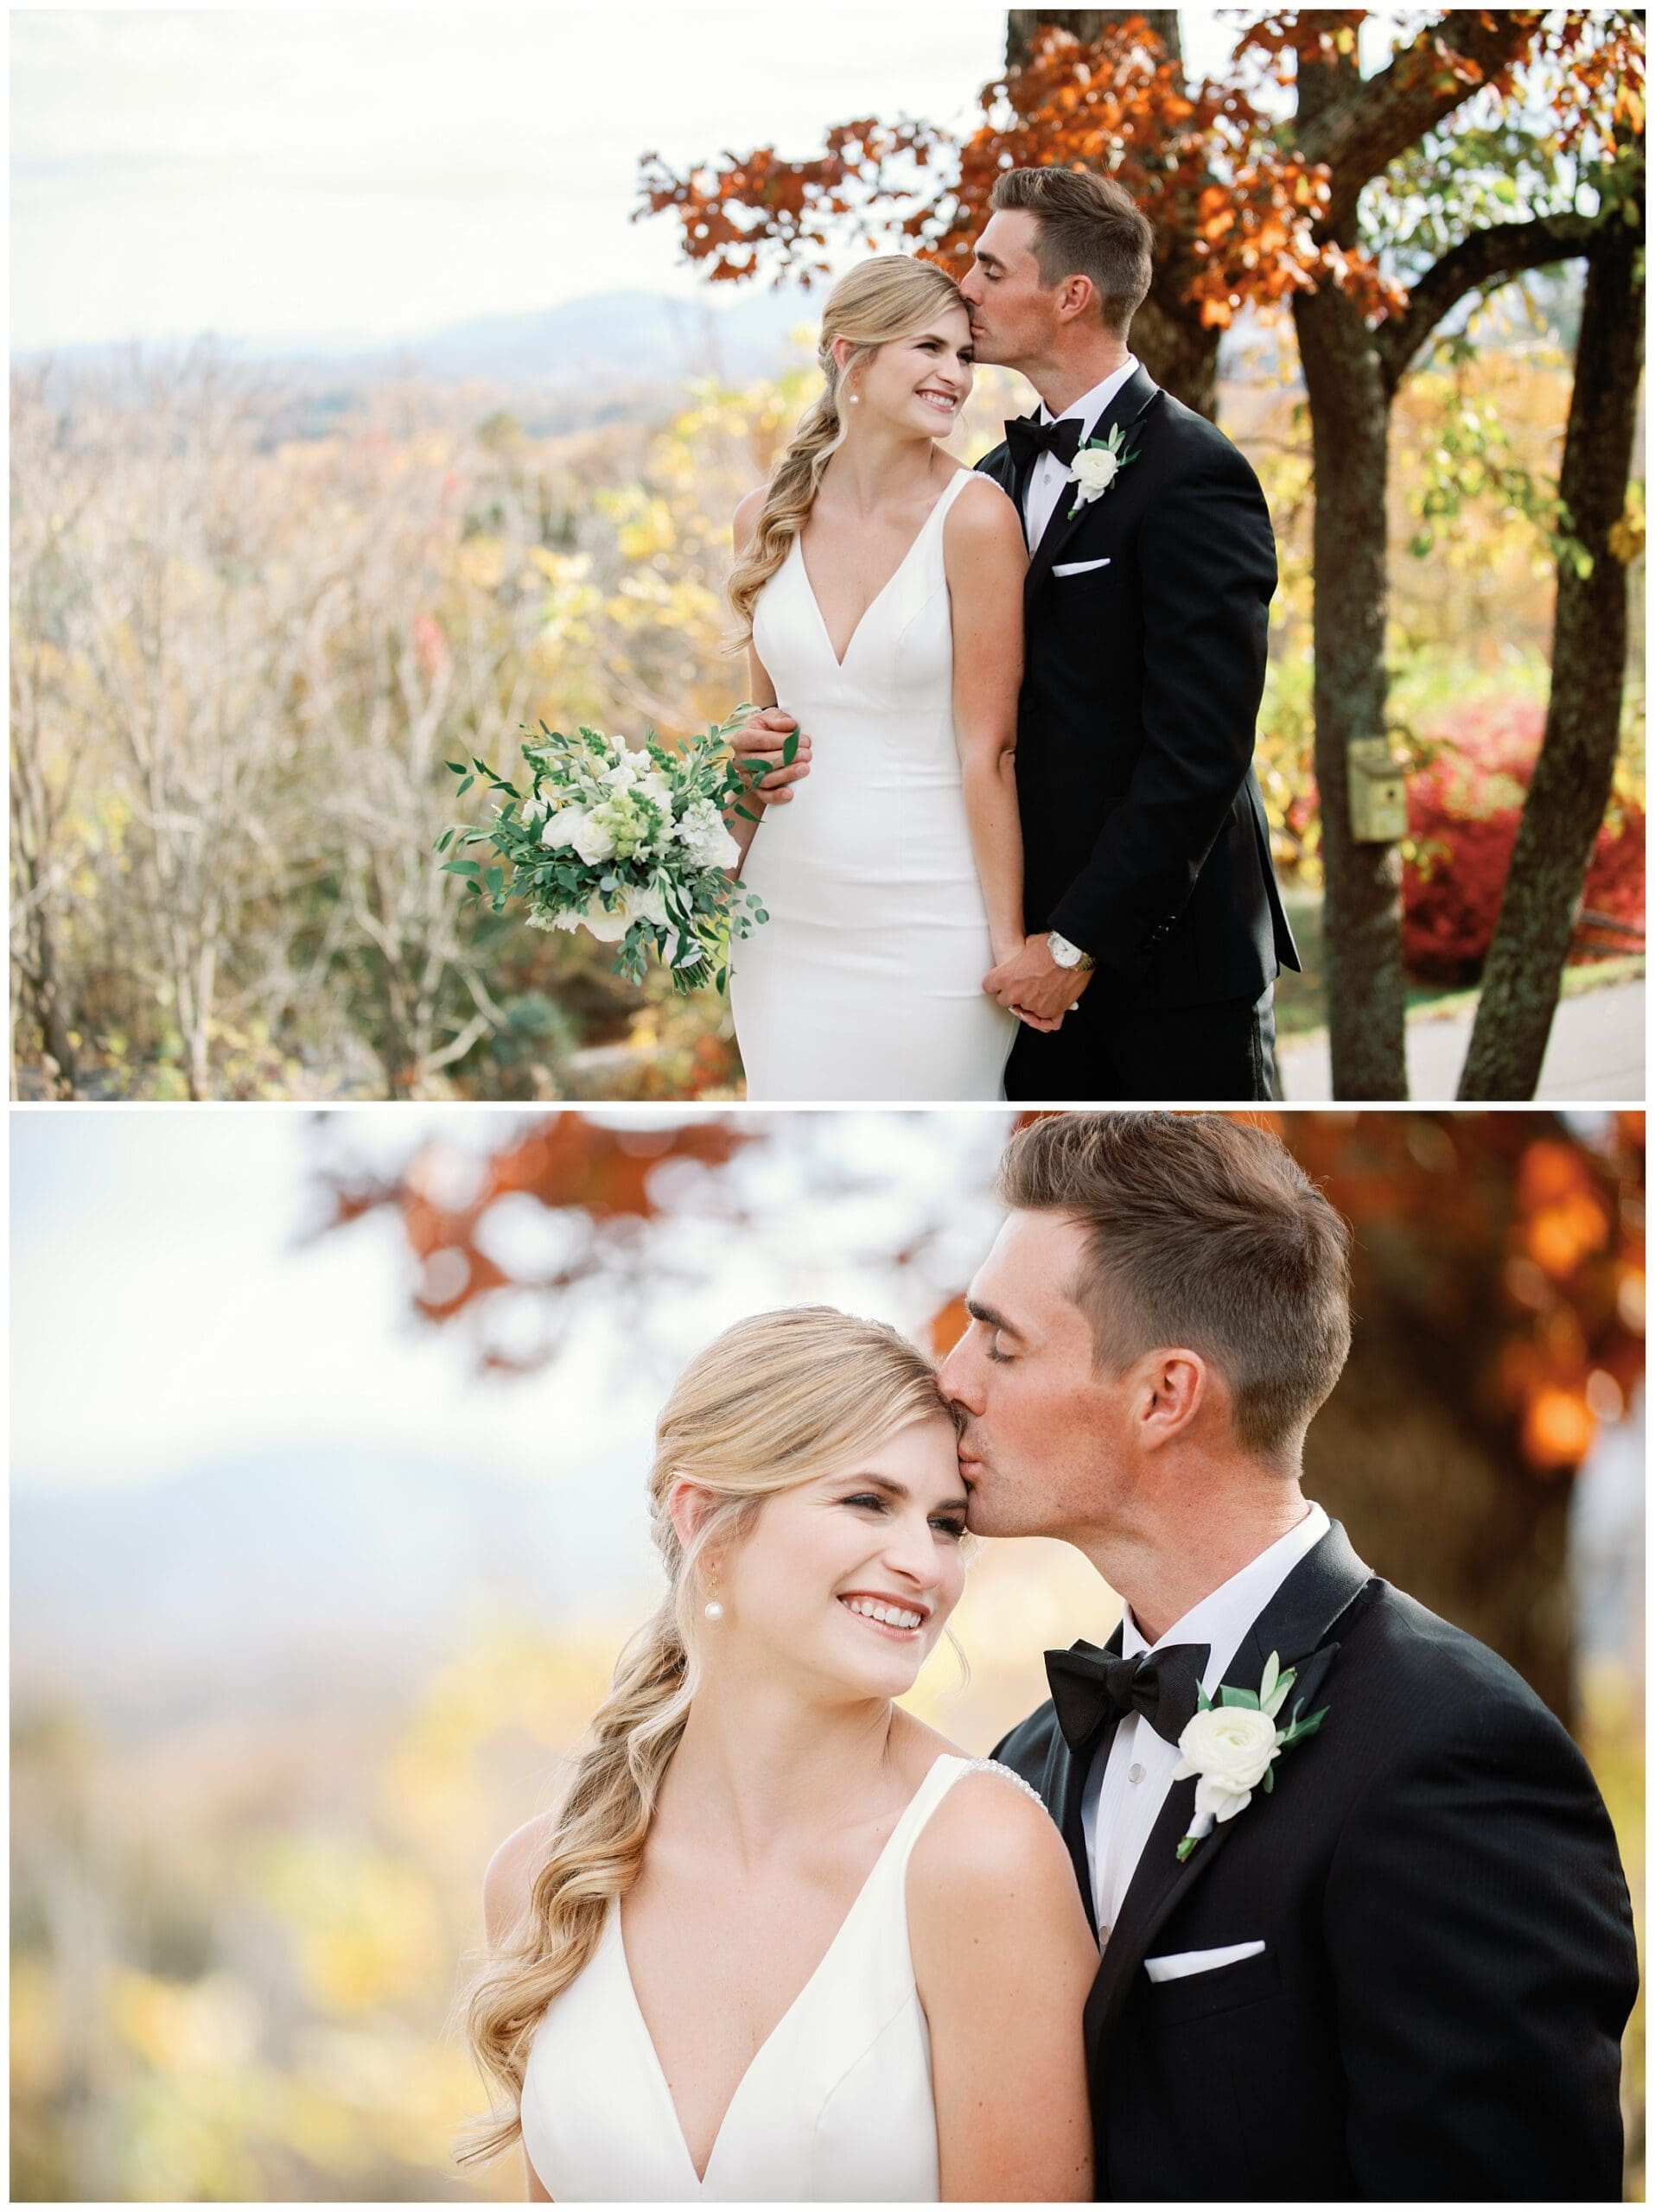 A bride and groom embracing during their fall wedding at Crest Center, with the breathtaking backdrop of the mountains.